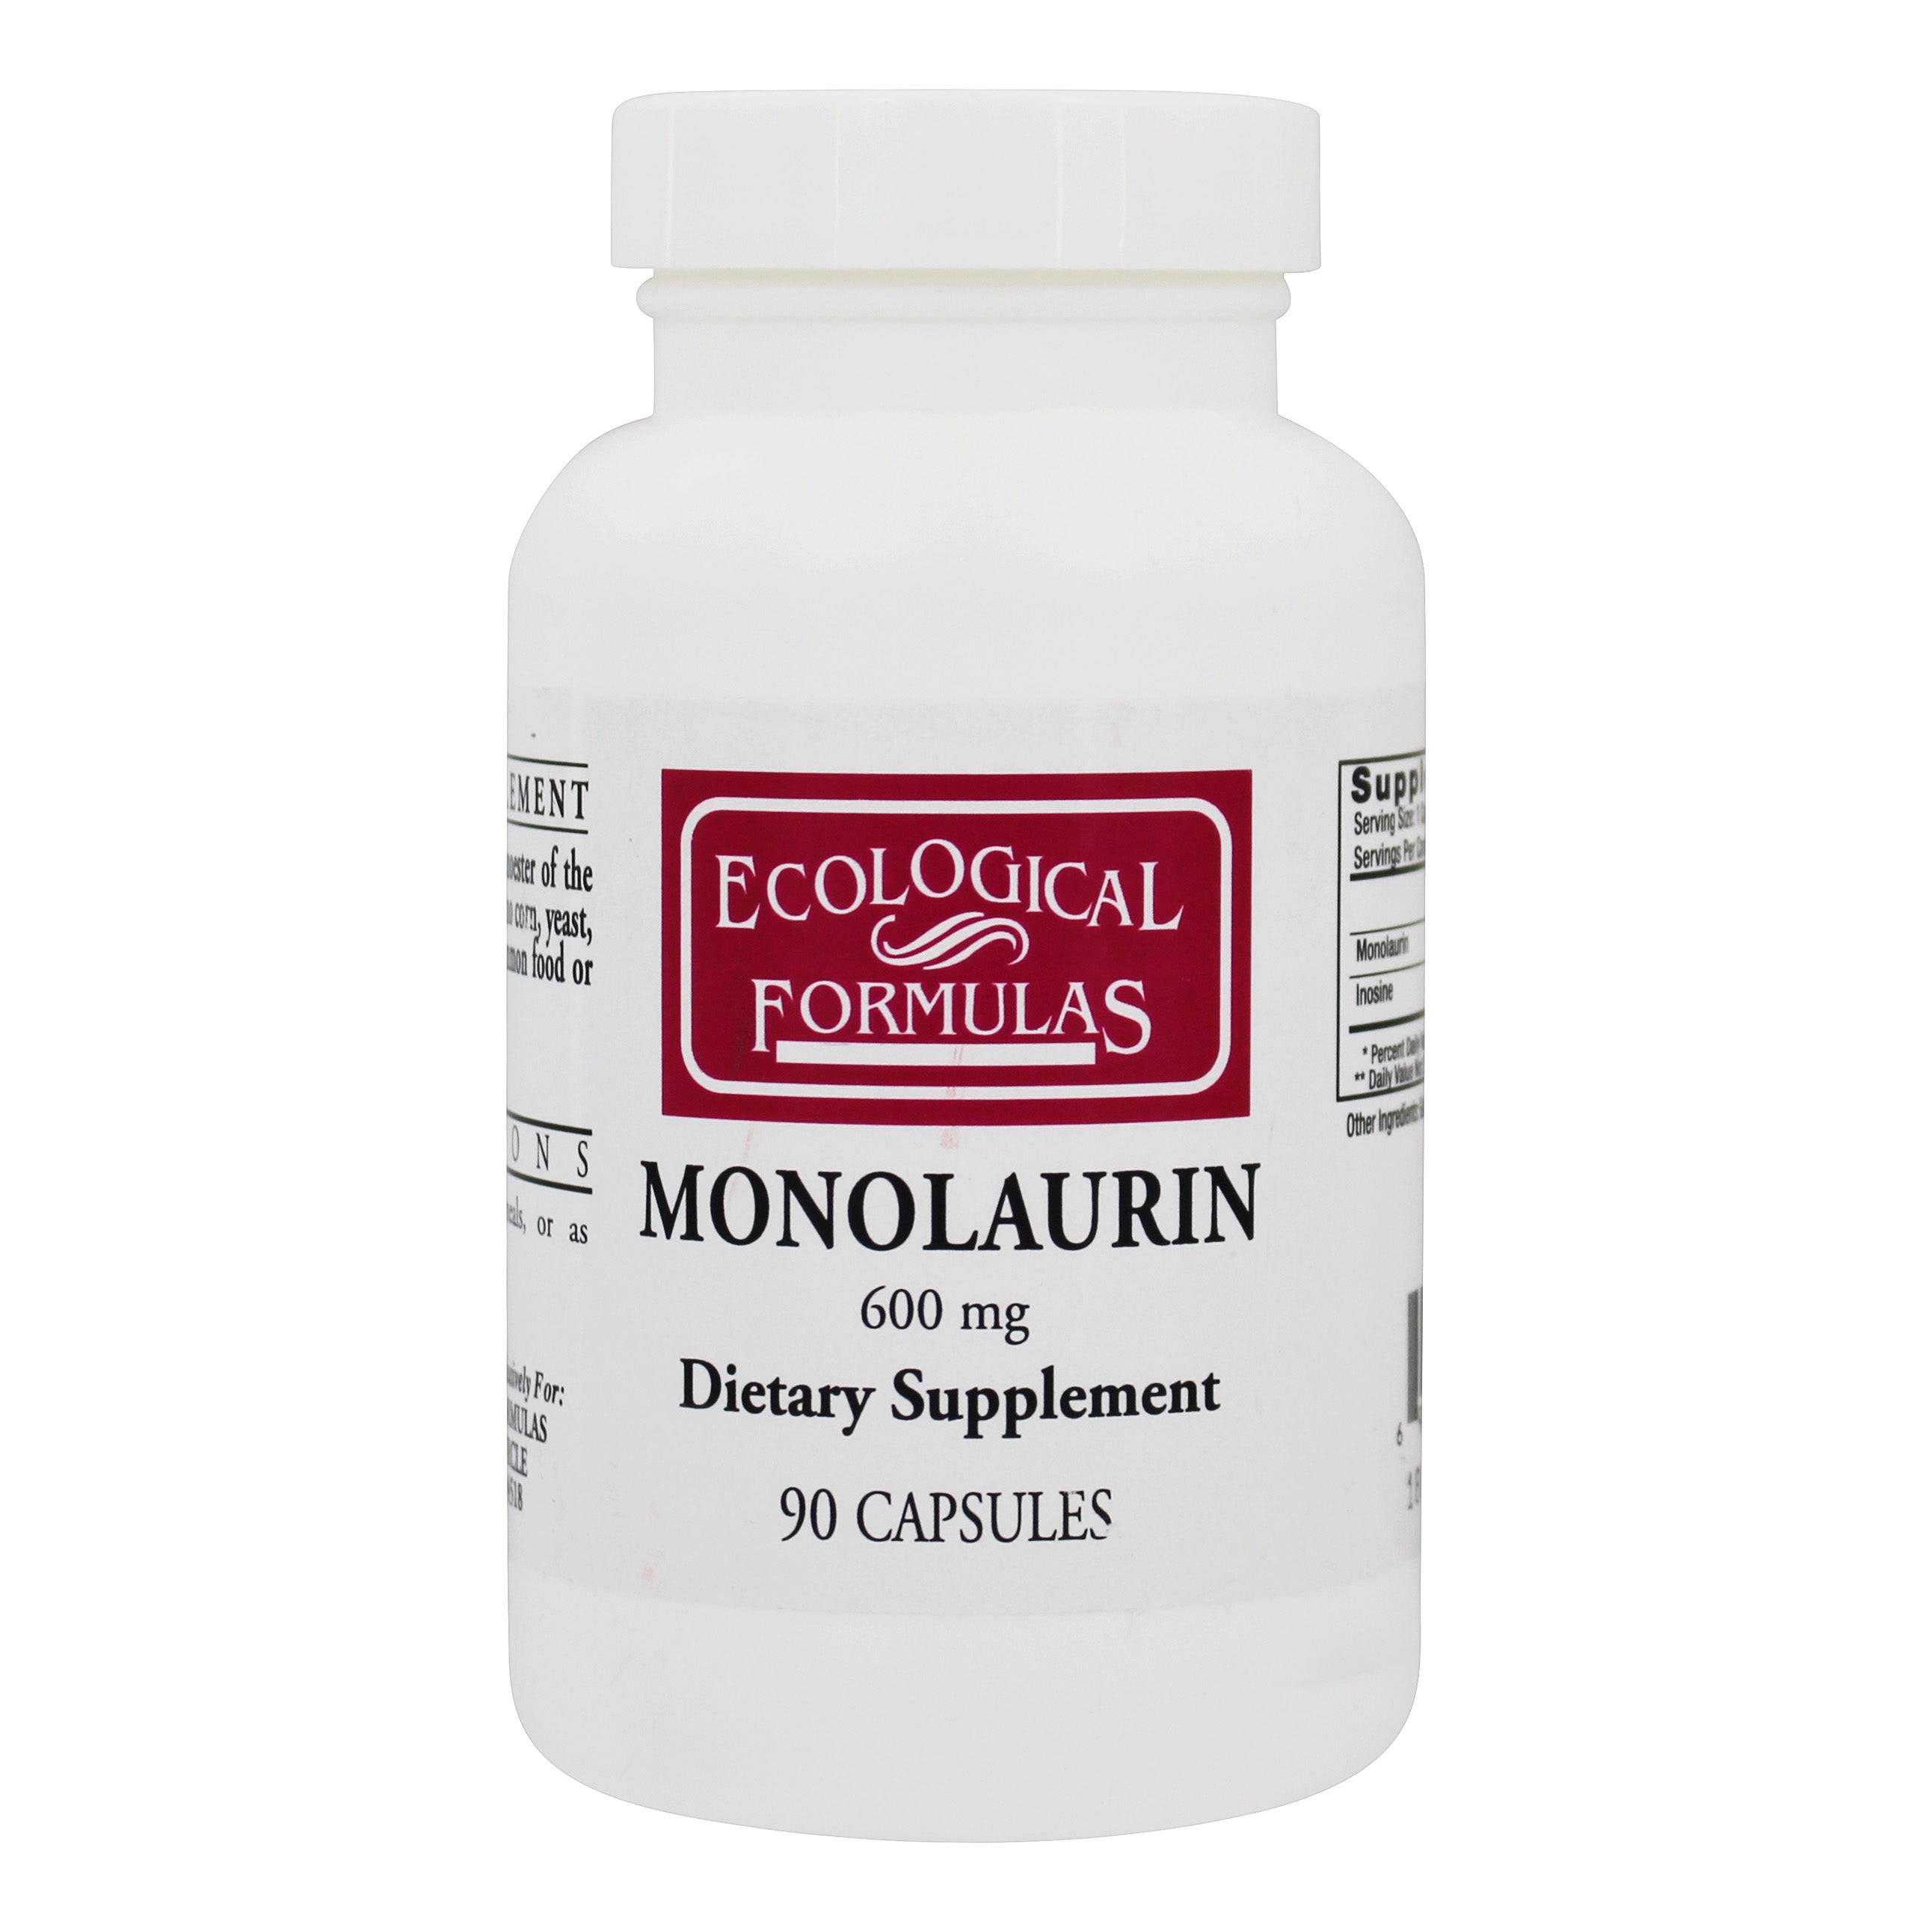 Monolaurin 600mg (Lauric Acid) - 90 Capsules | Ecological Formulas